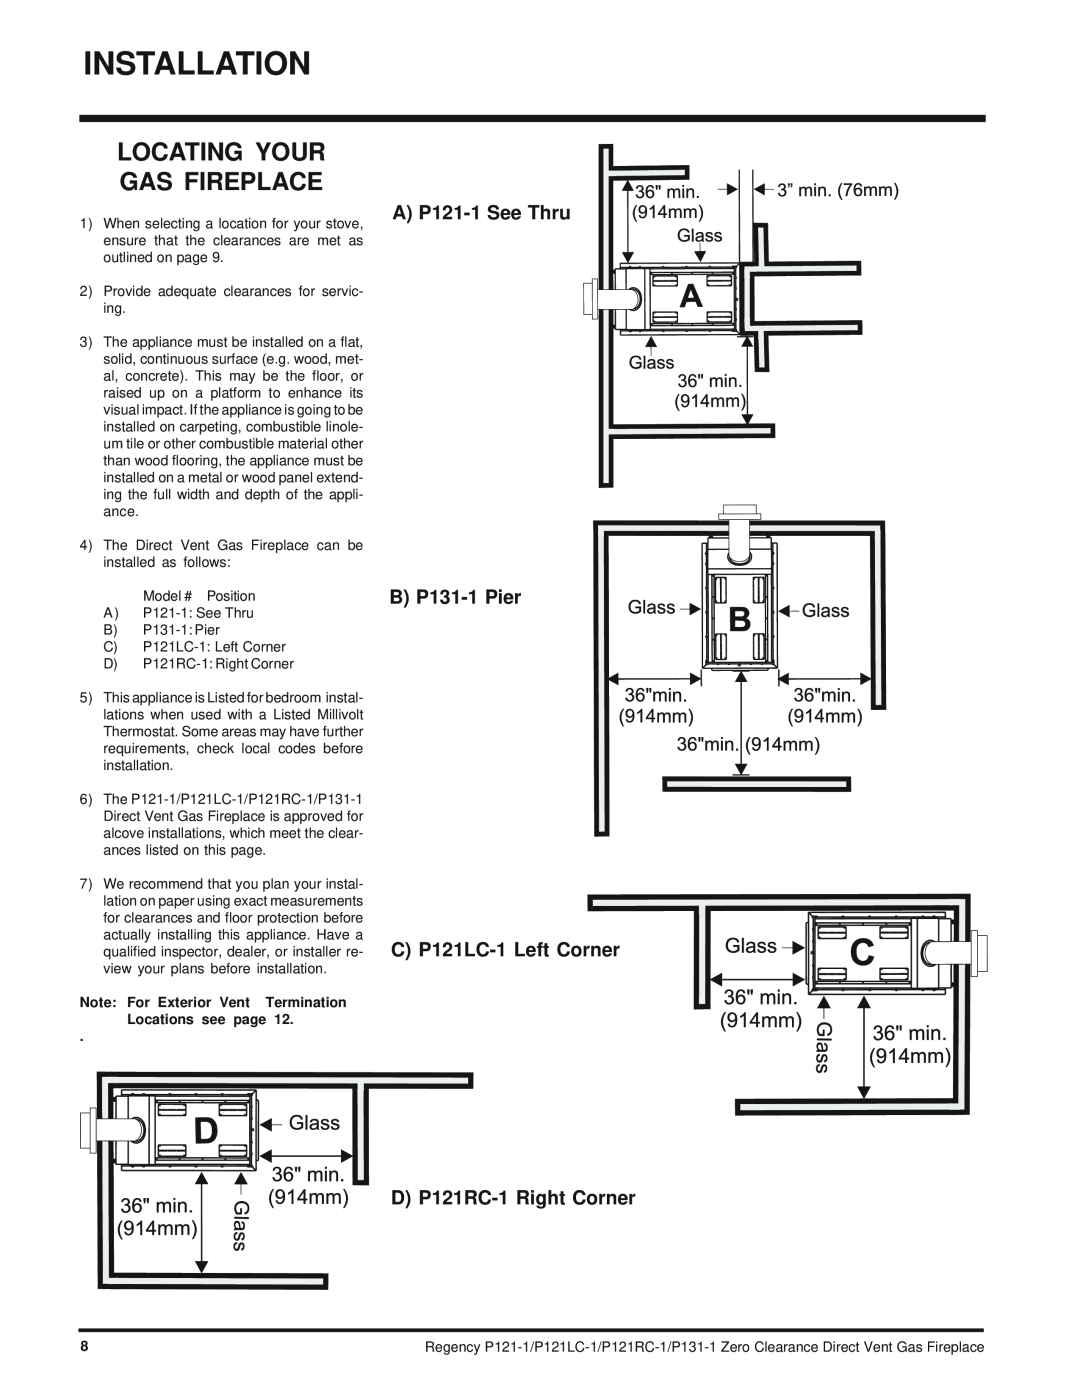 Regency P121RC, P121LC installation manual Installation, Locating Your Gas Fireplace, A P121-1See Thru B P131-1Pier 